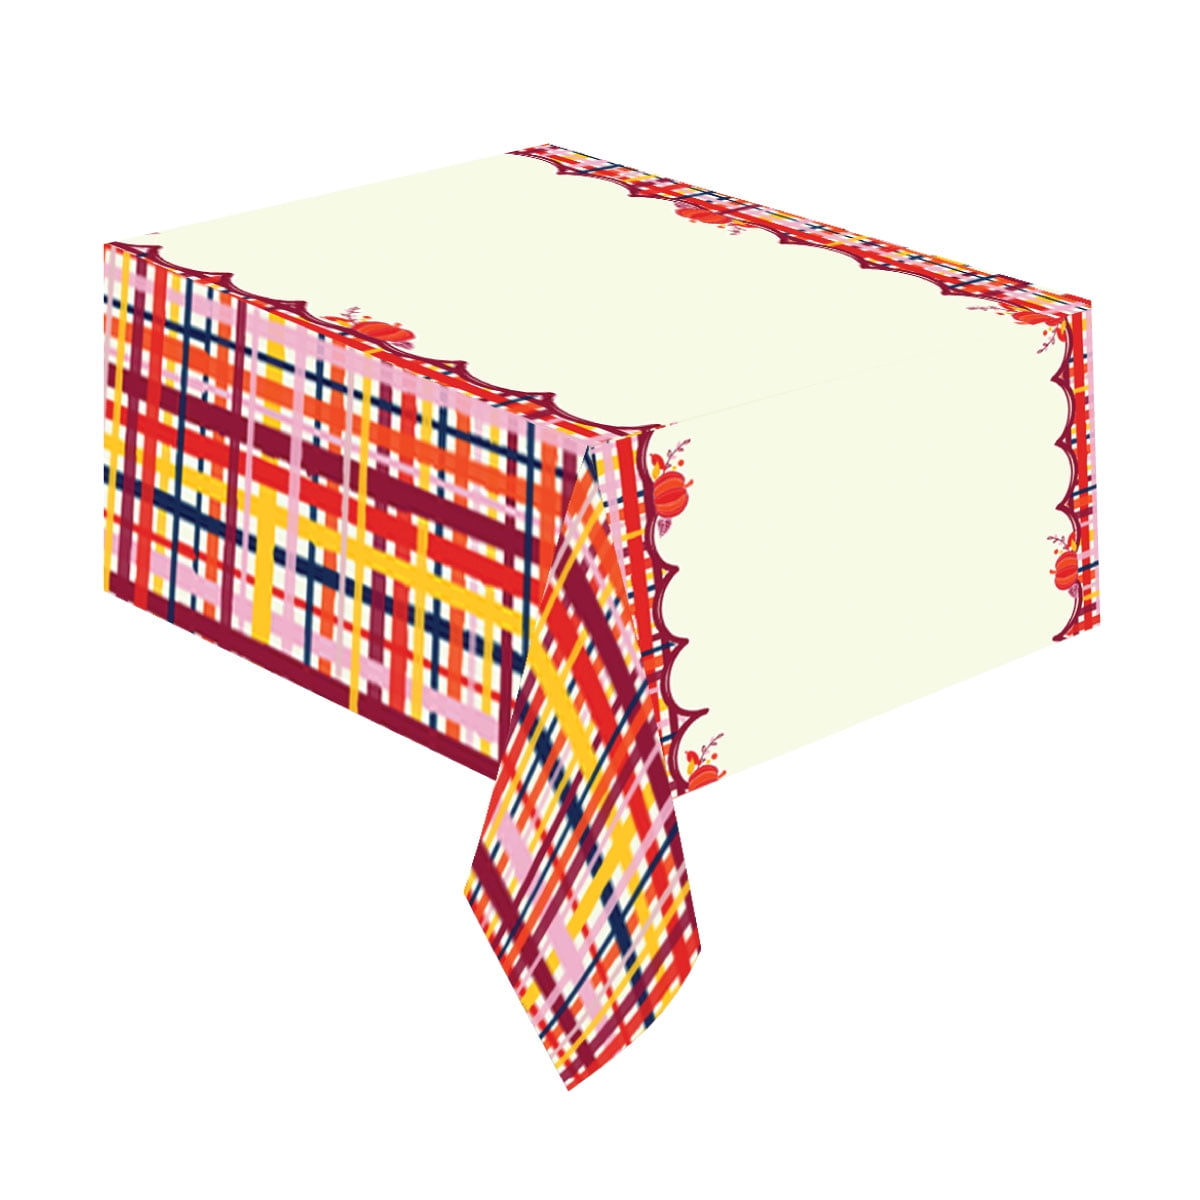 Packed Party "Extra Thankful" 84" x 54" 2 ct. Plaid Disposable Table Cover